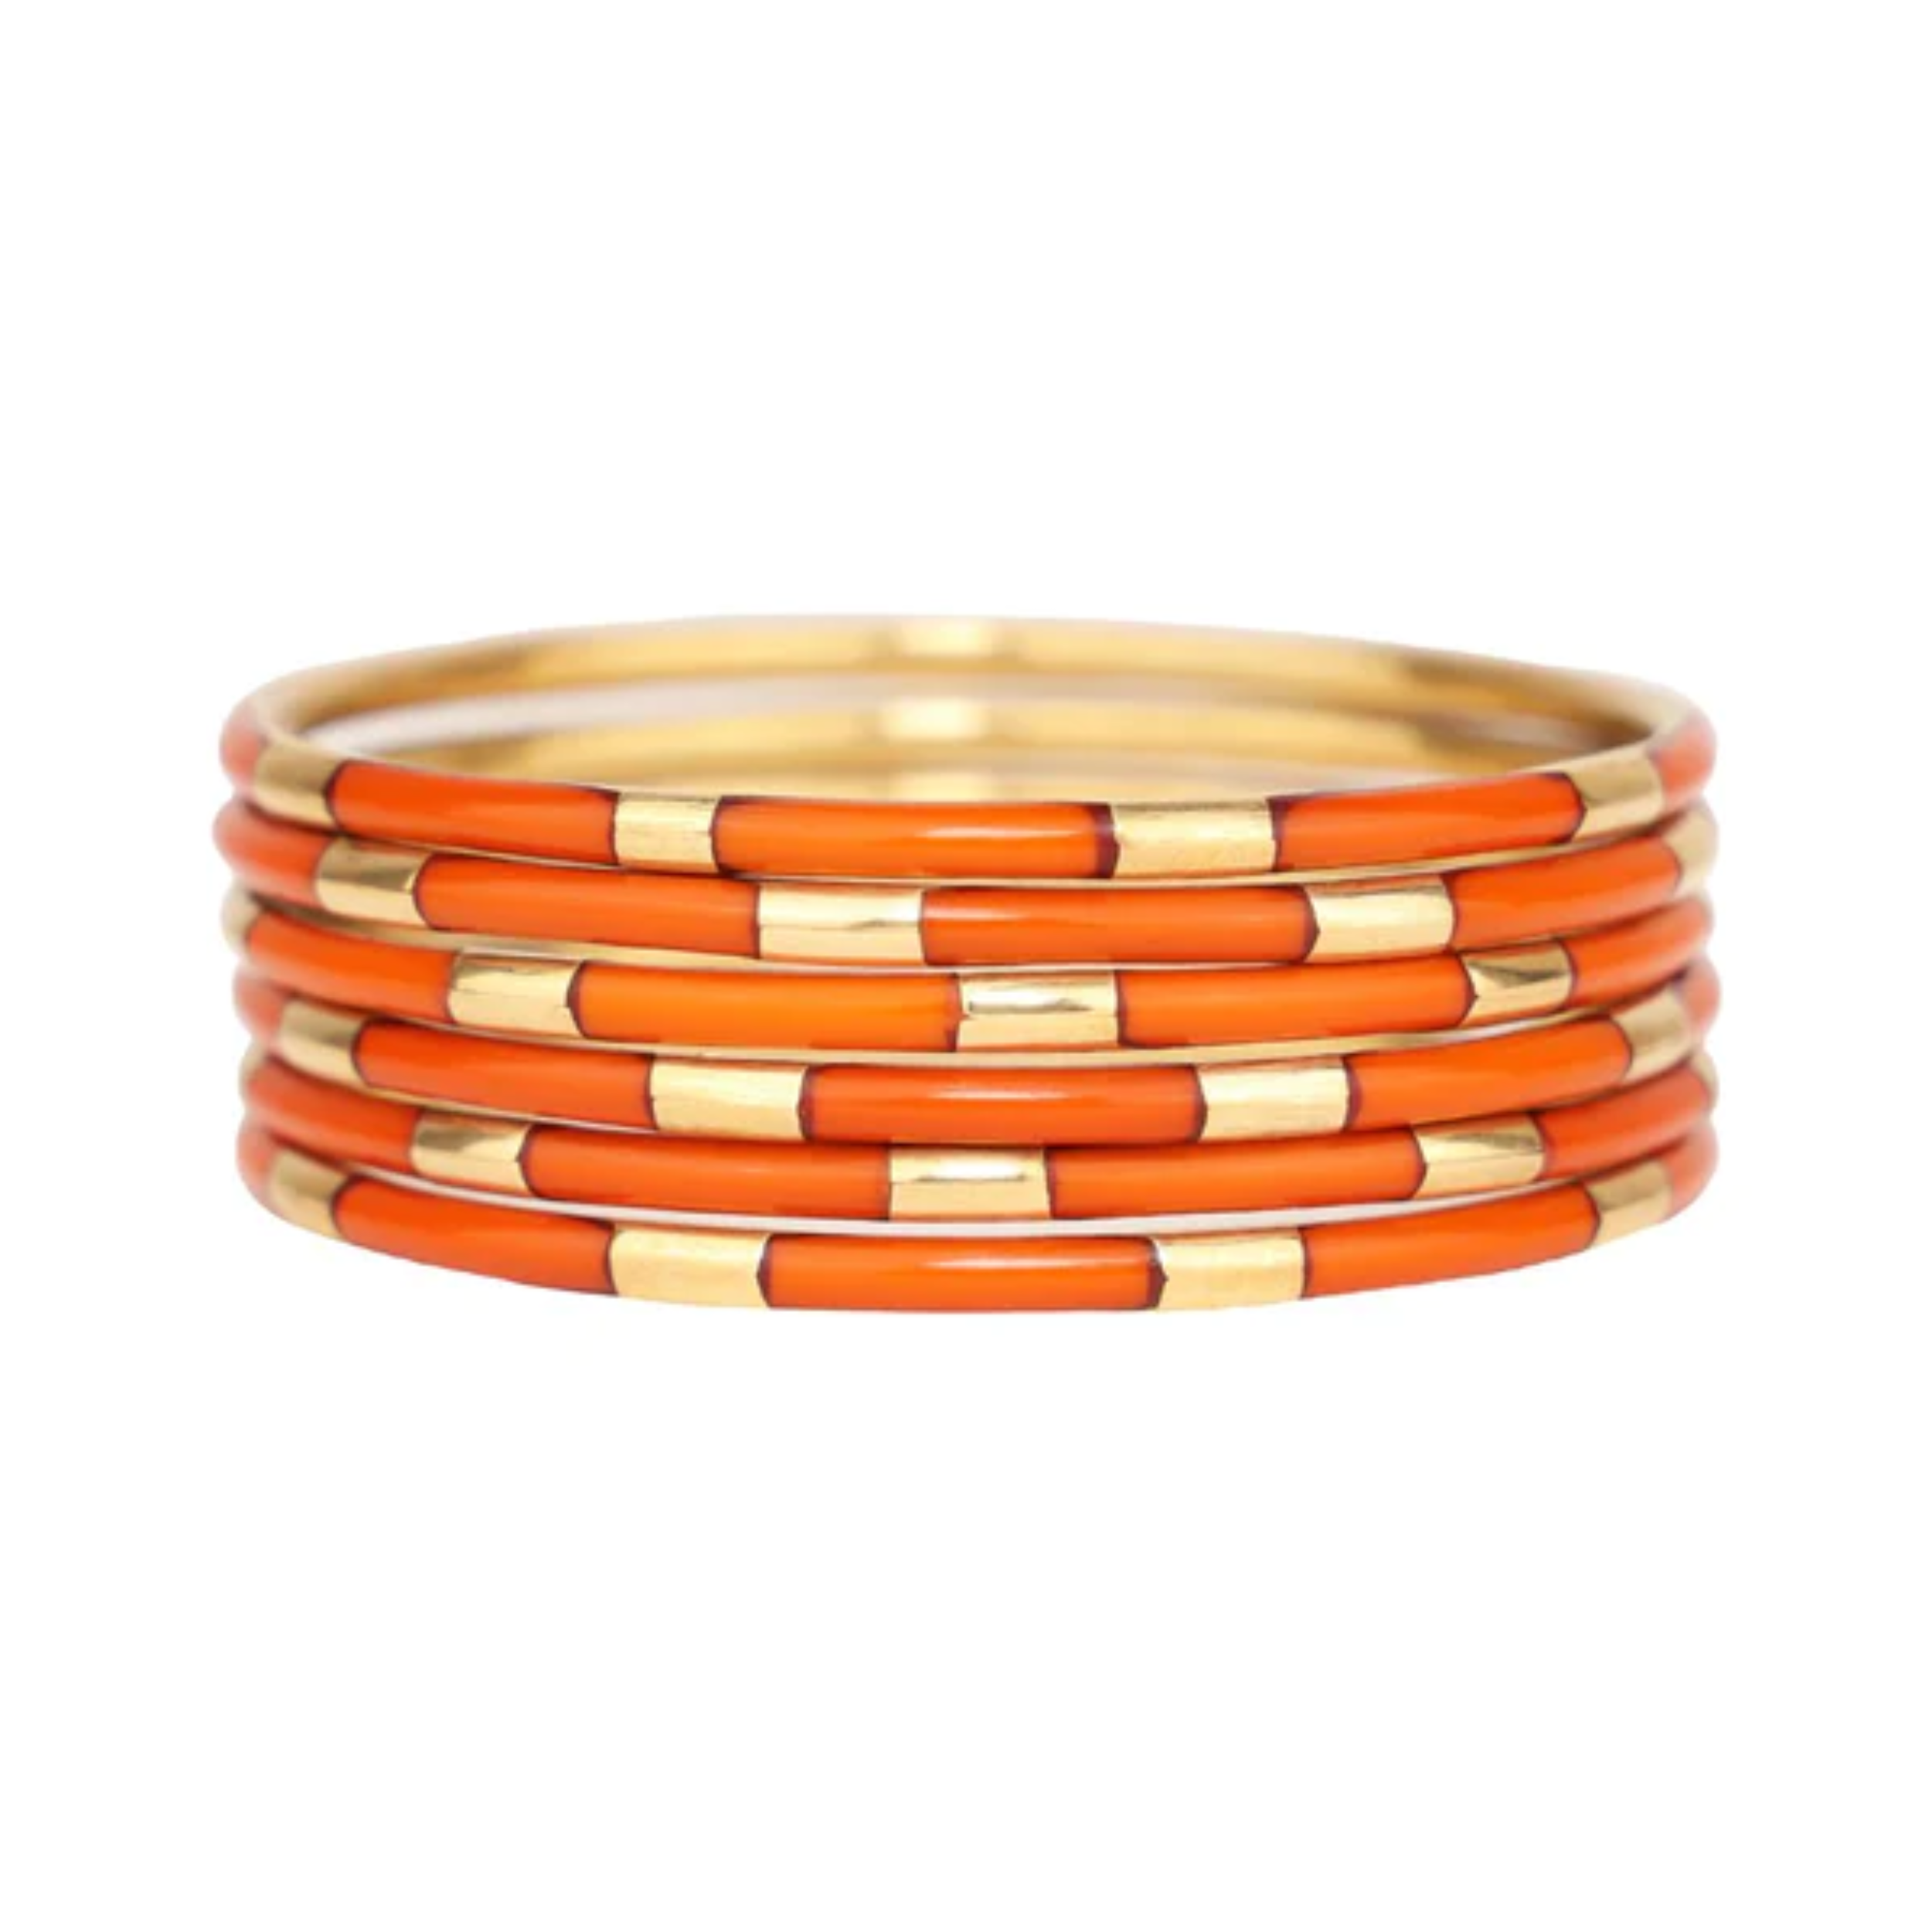 This set of Veda Bangles in Burnt Orange by Budha Girl are pictured on a white background.